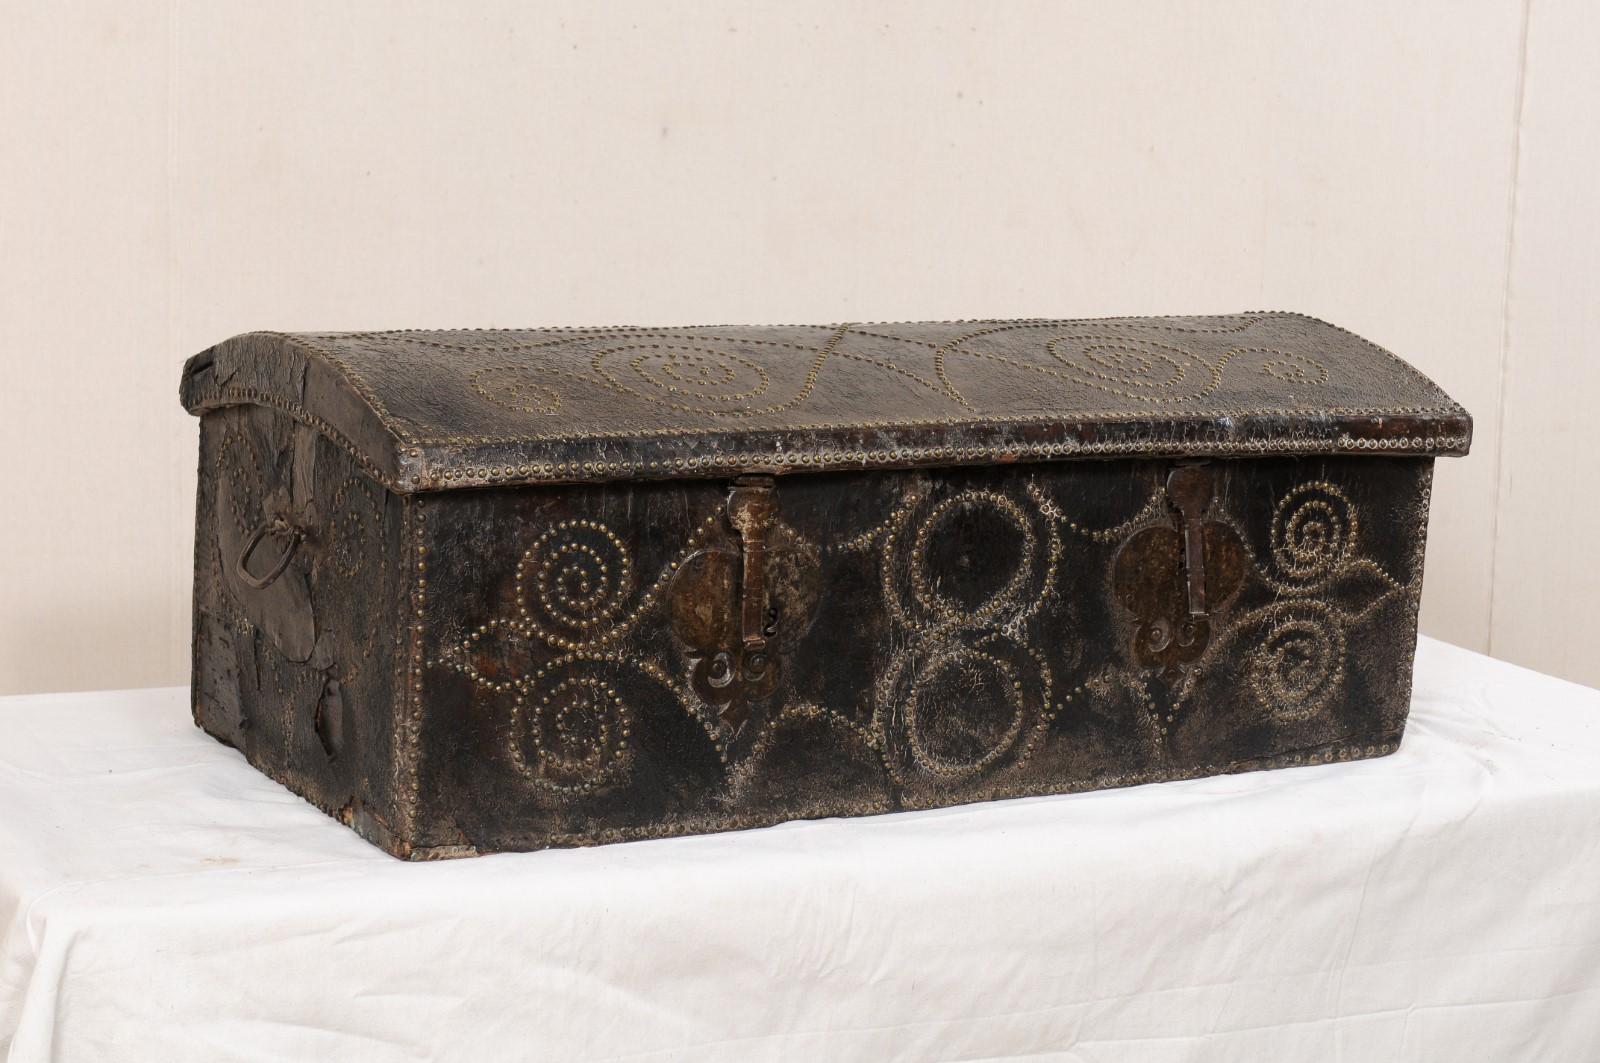 A Spanish coffer wrapped in leather and adorn with studs from the turn of the 18th and 19th century. This antique Spanish coffer, with it's rectangular-shaped body and slightly domed top, has been wrapped in leather and ornately adorn with nail-head